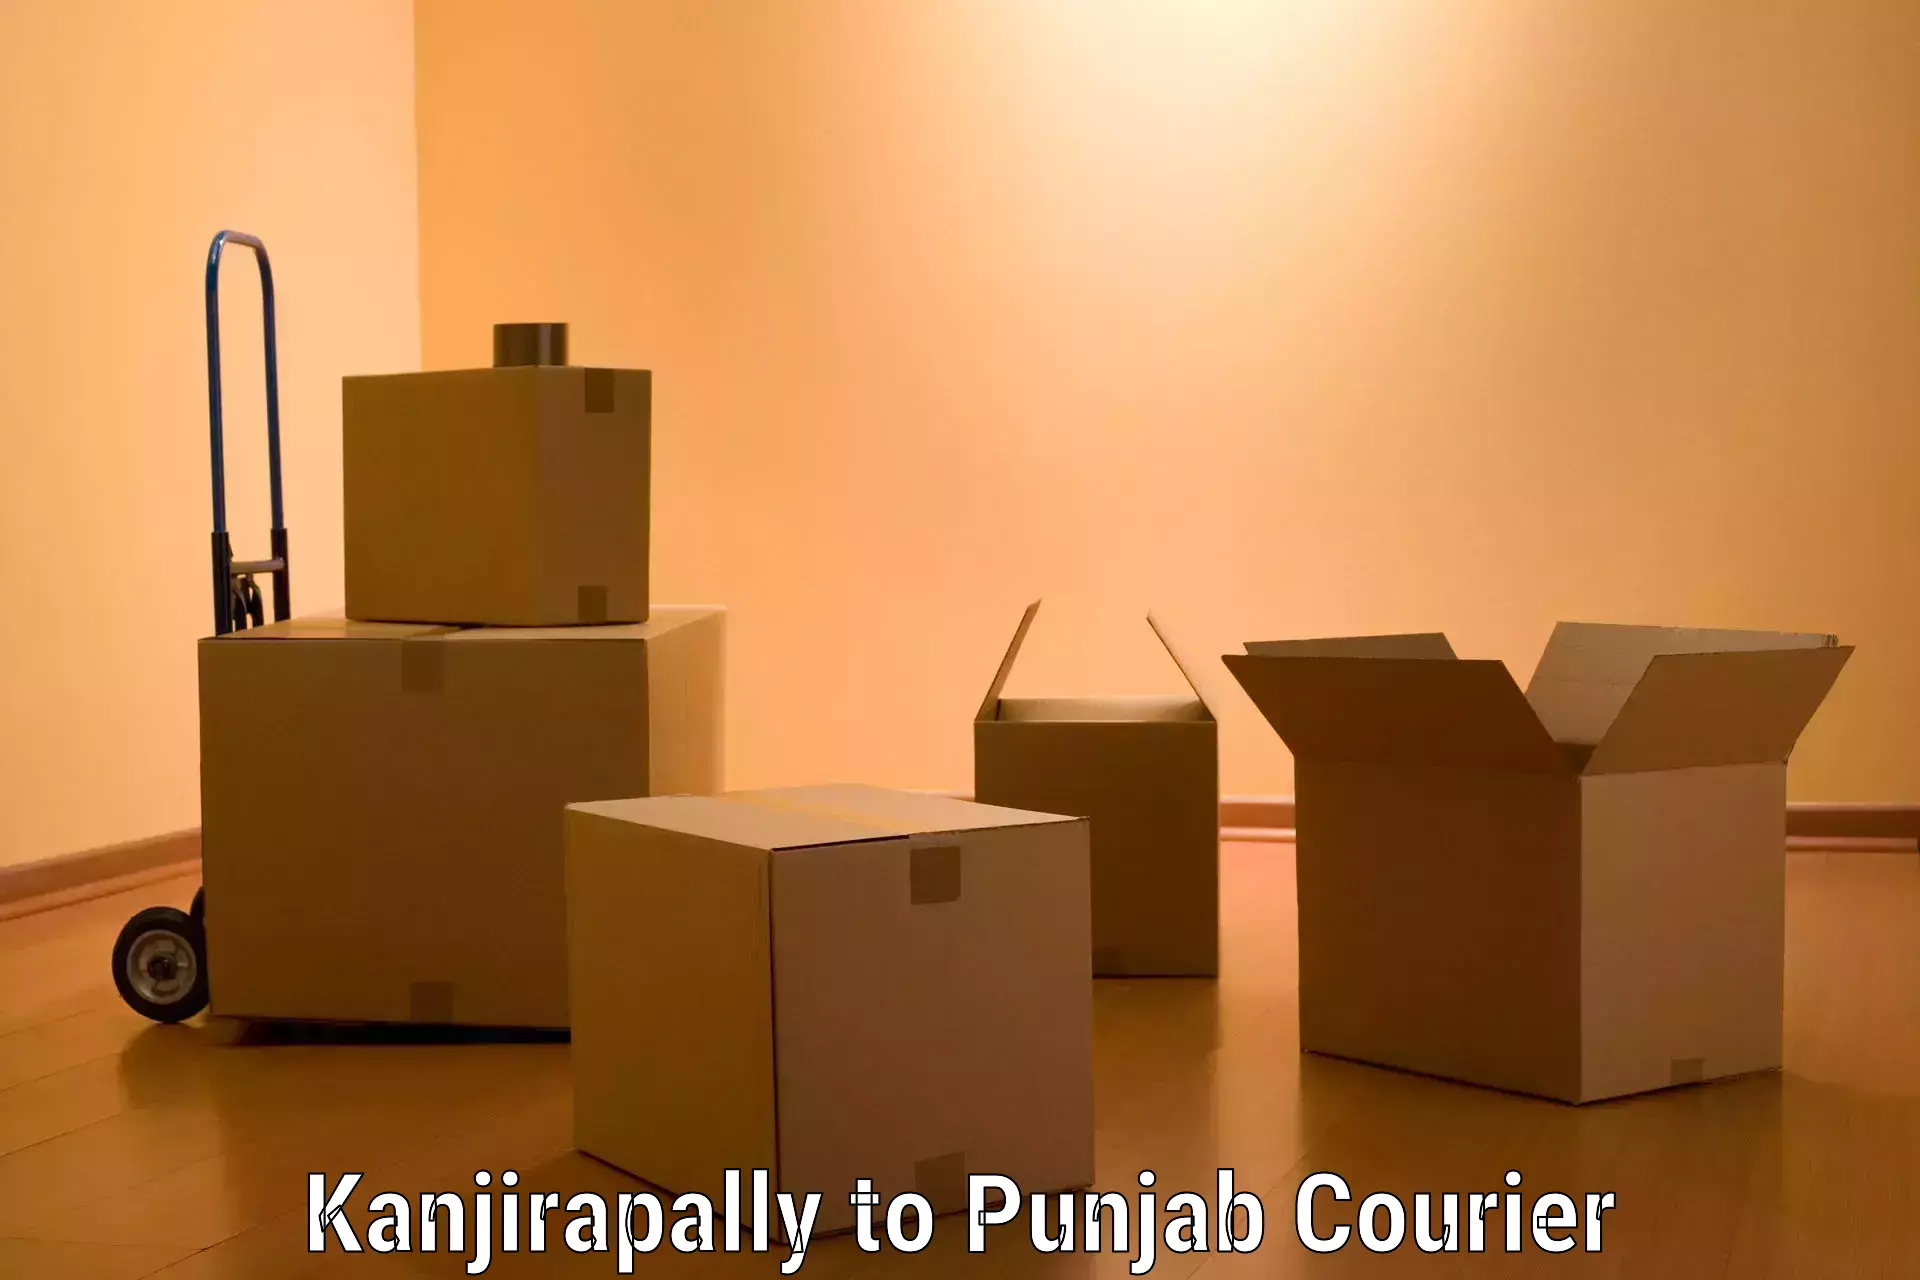 Budget-friendly moving services in Kanjirapally to Mohali